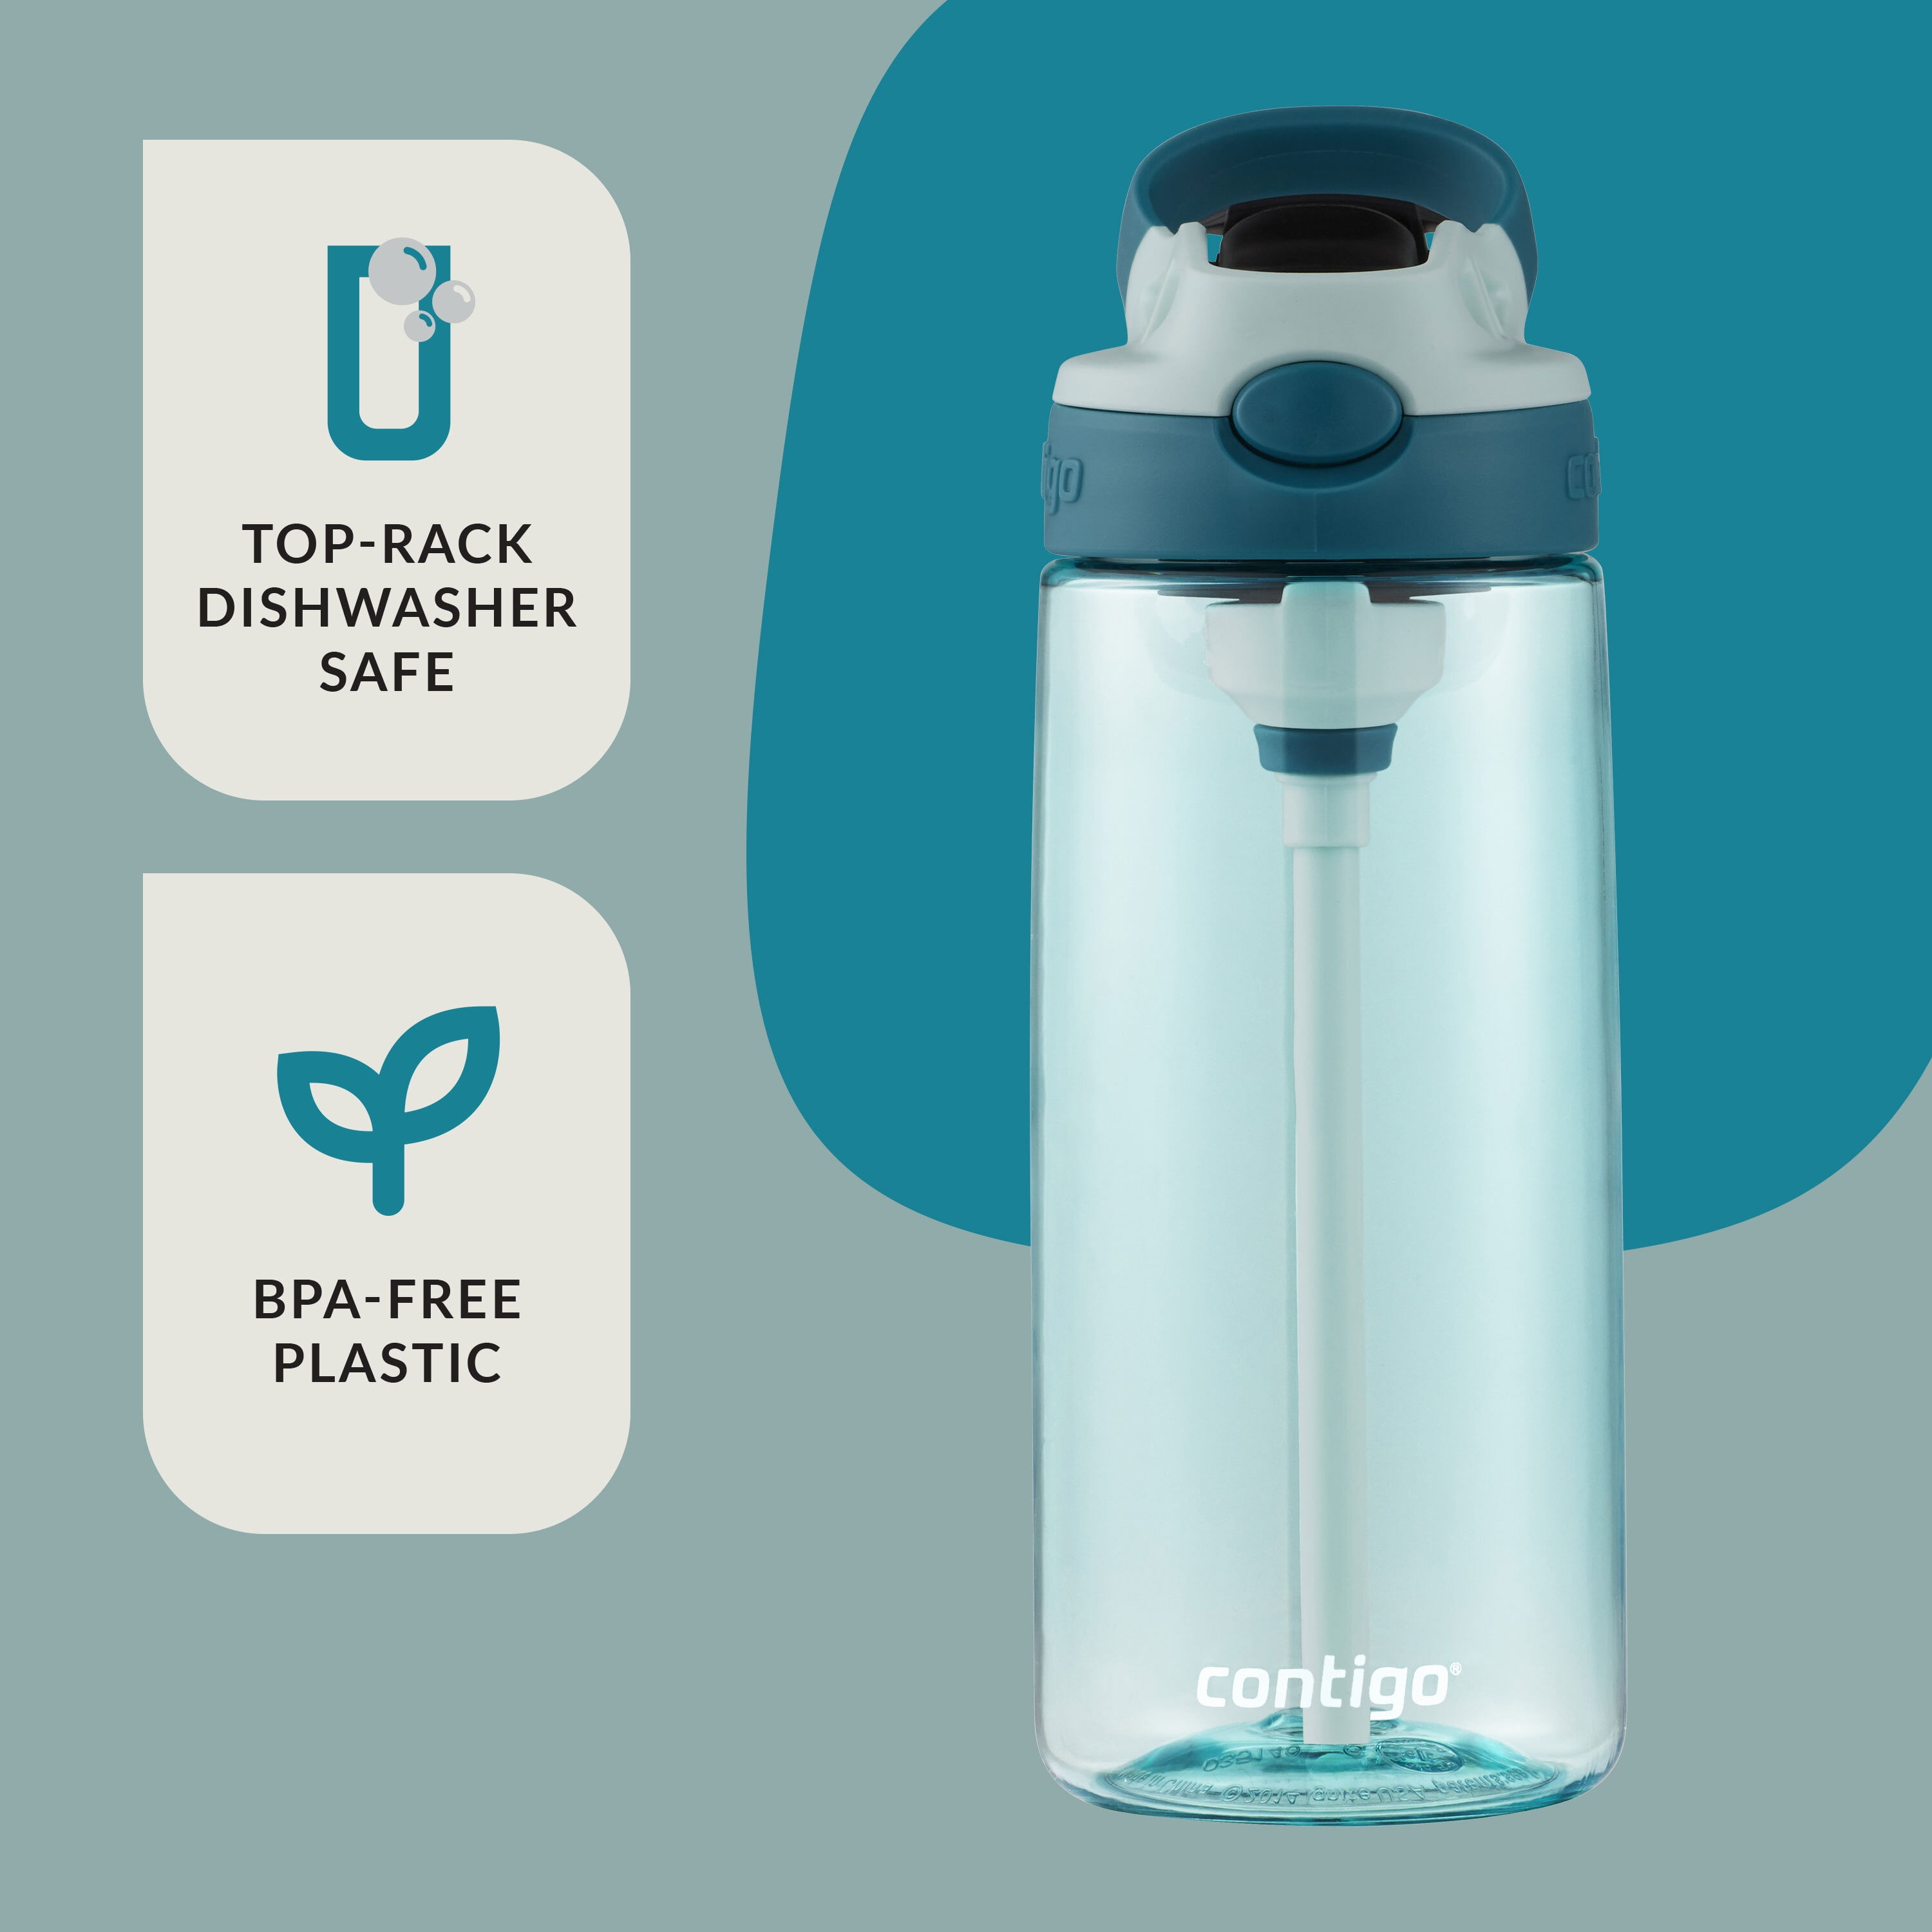 Contigo - As a leading innovator of water bottles, travel mugs and kids  bottles, Contigo® puts safety and quality first. As part of our commitment  to consumer safety, Contigo®, in partnership with